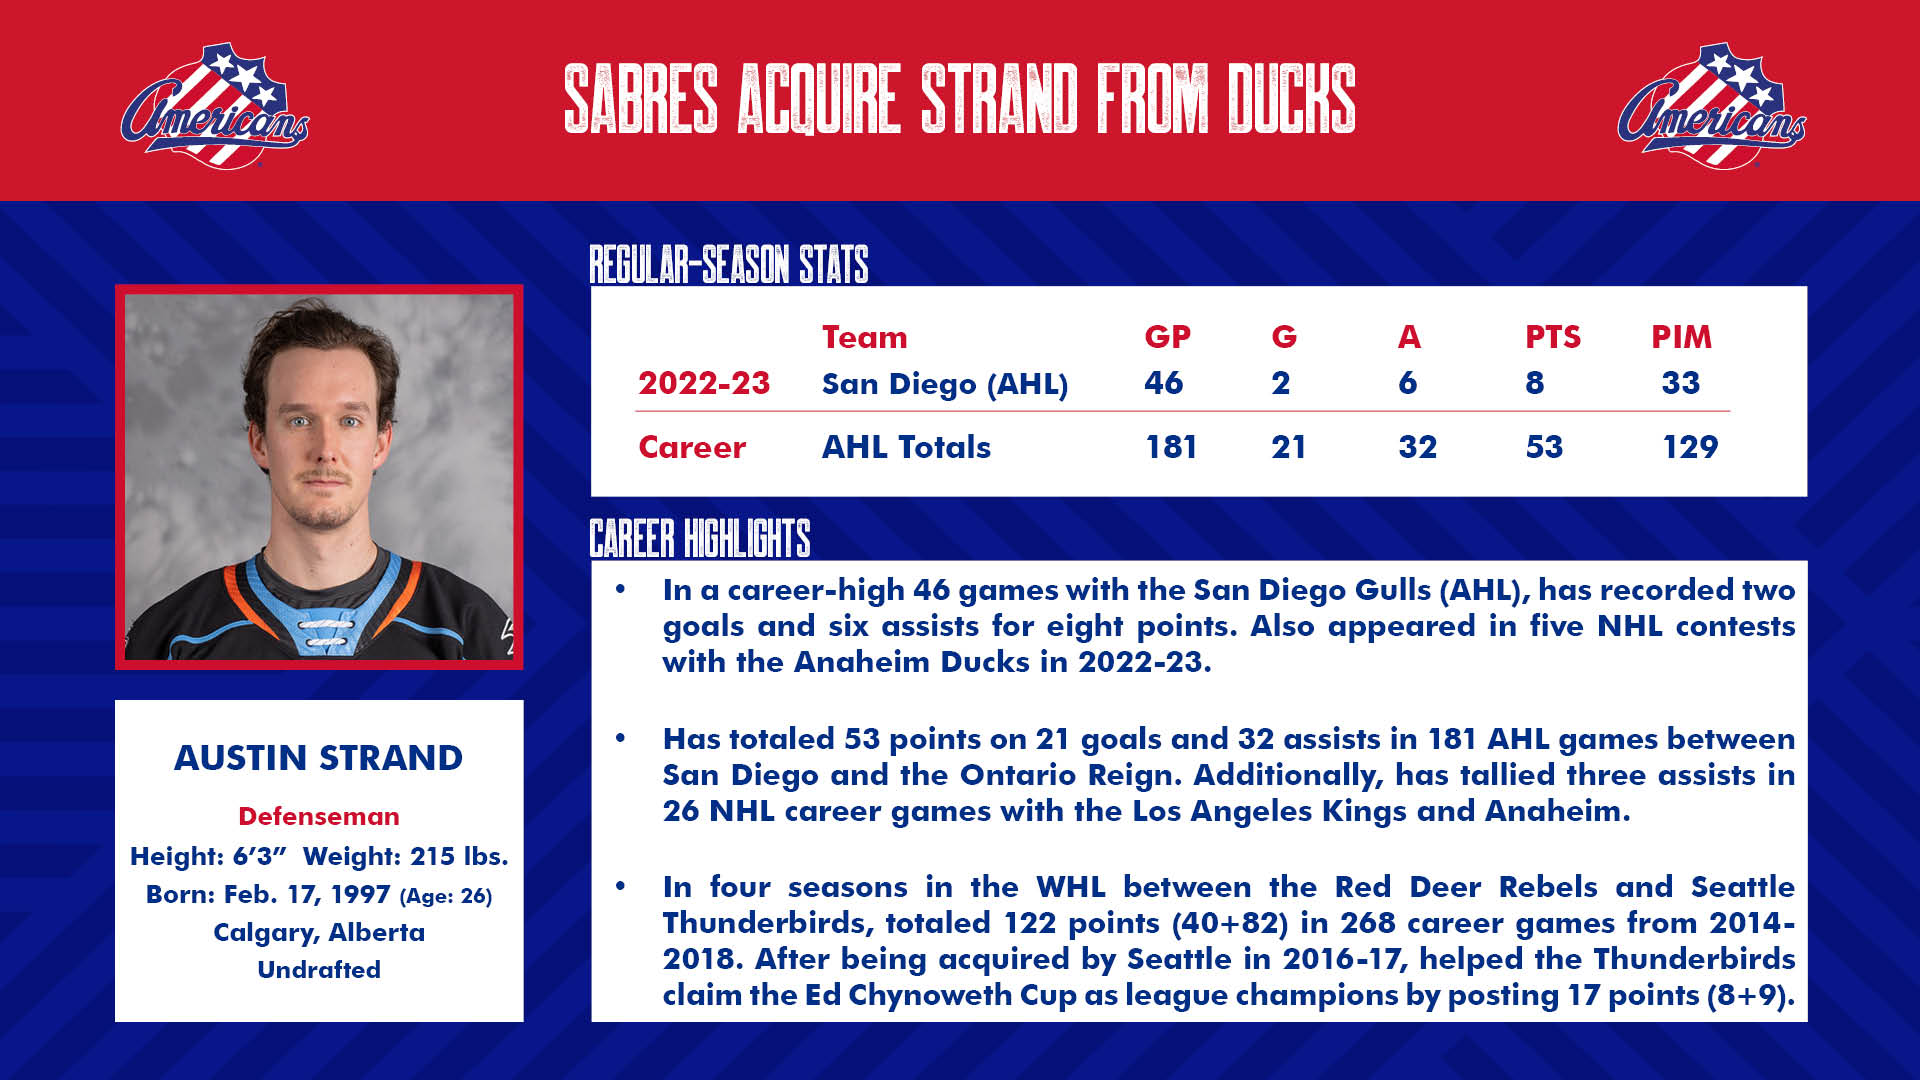 Sabres aquire Strand from Ducks.jpg